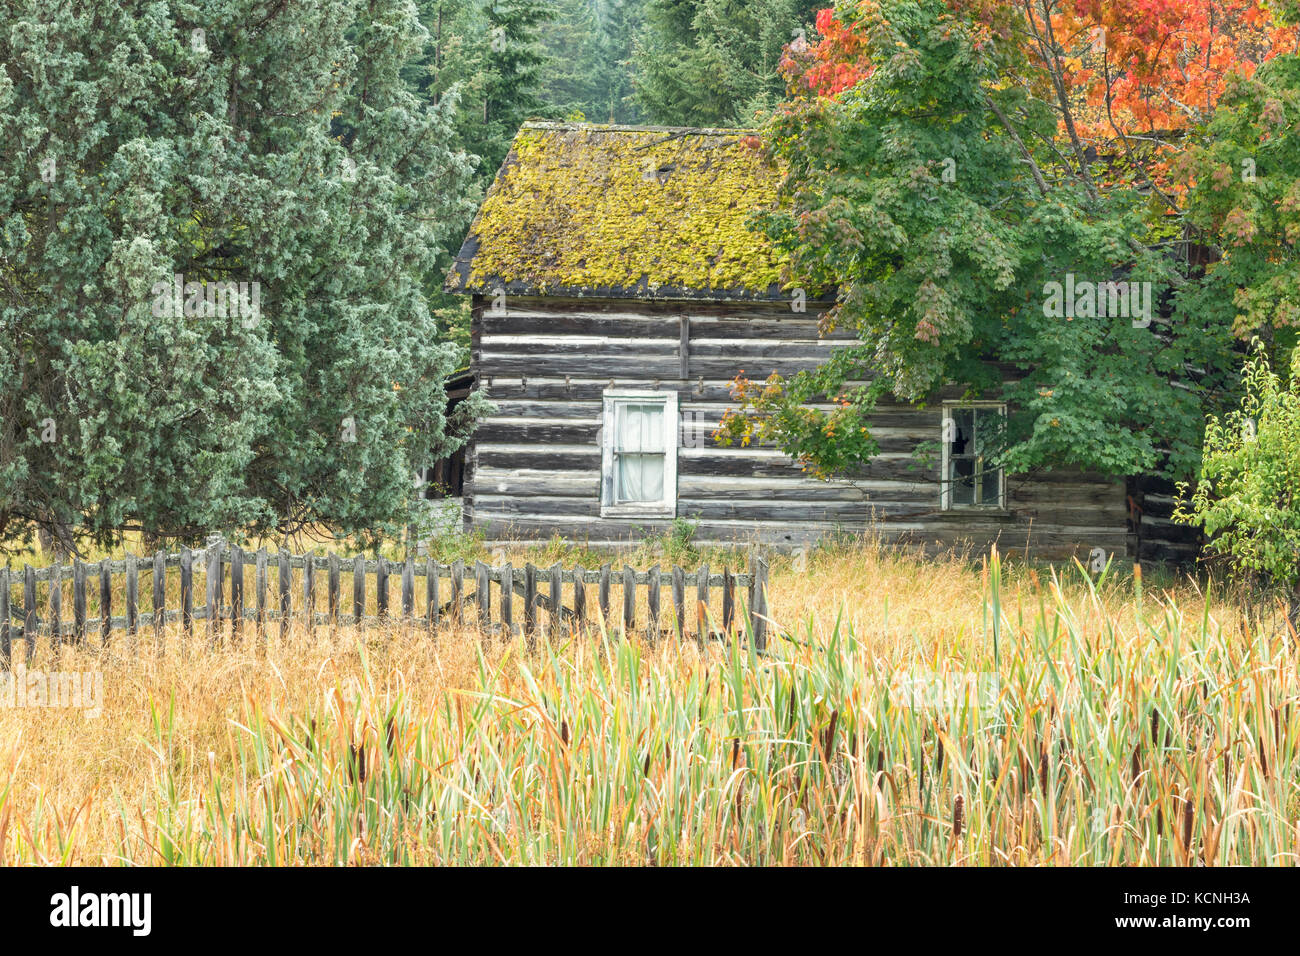 Abandoned log home with sod roof, Cherryville, British Columbia, Canada Stock Photo